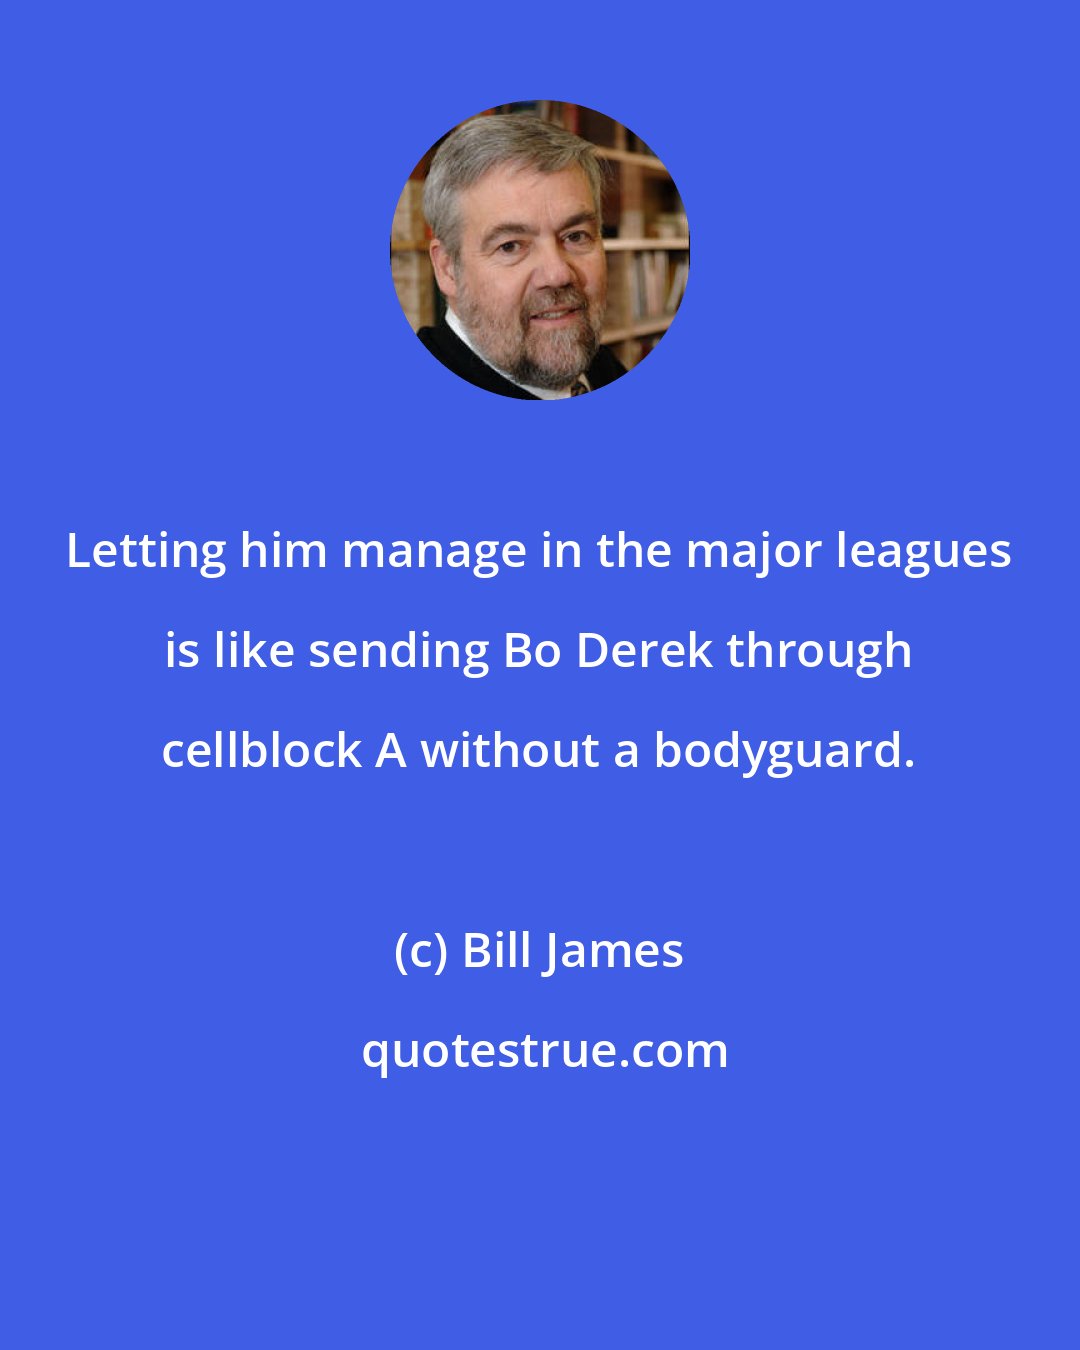 Bill James: Letting him manage in the major leagues is like sending Bo Derek through cellblock A without a bodyguard.